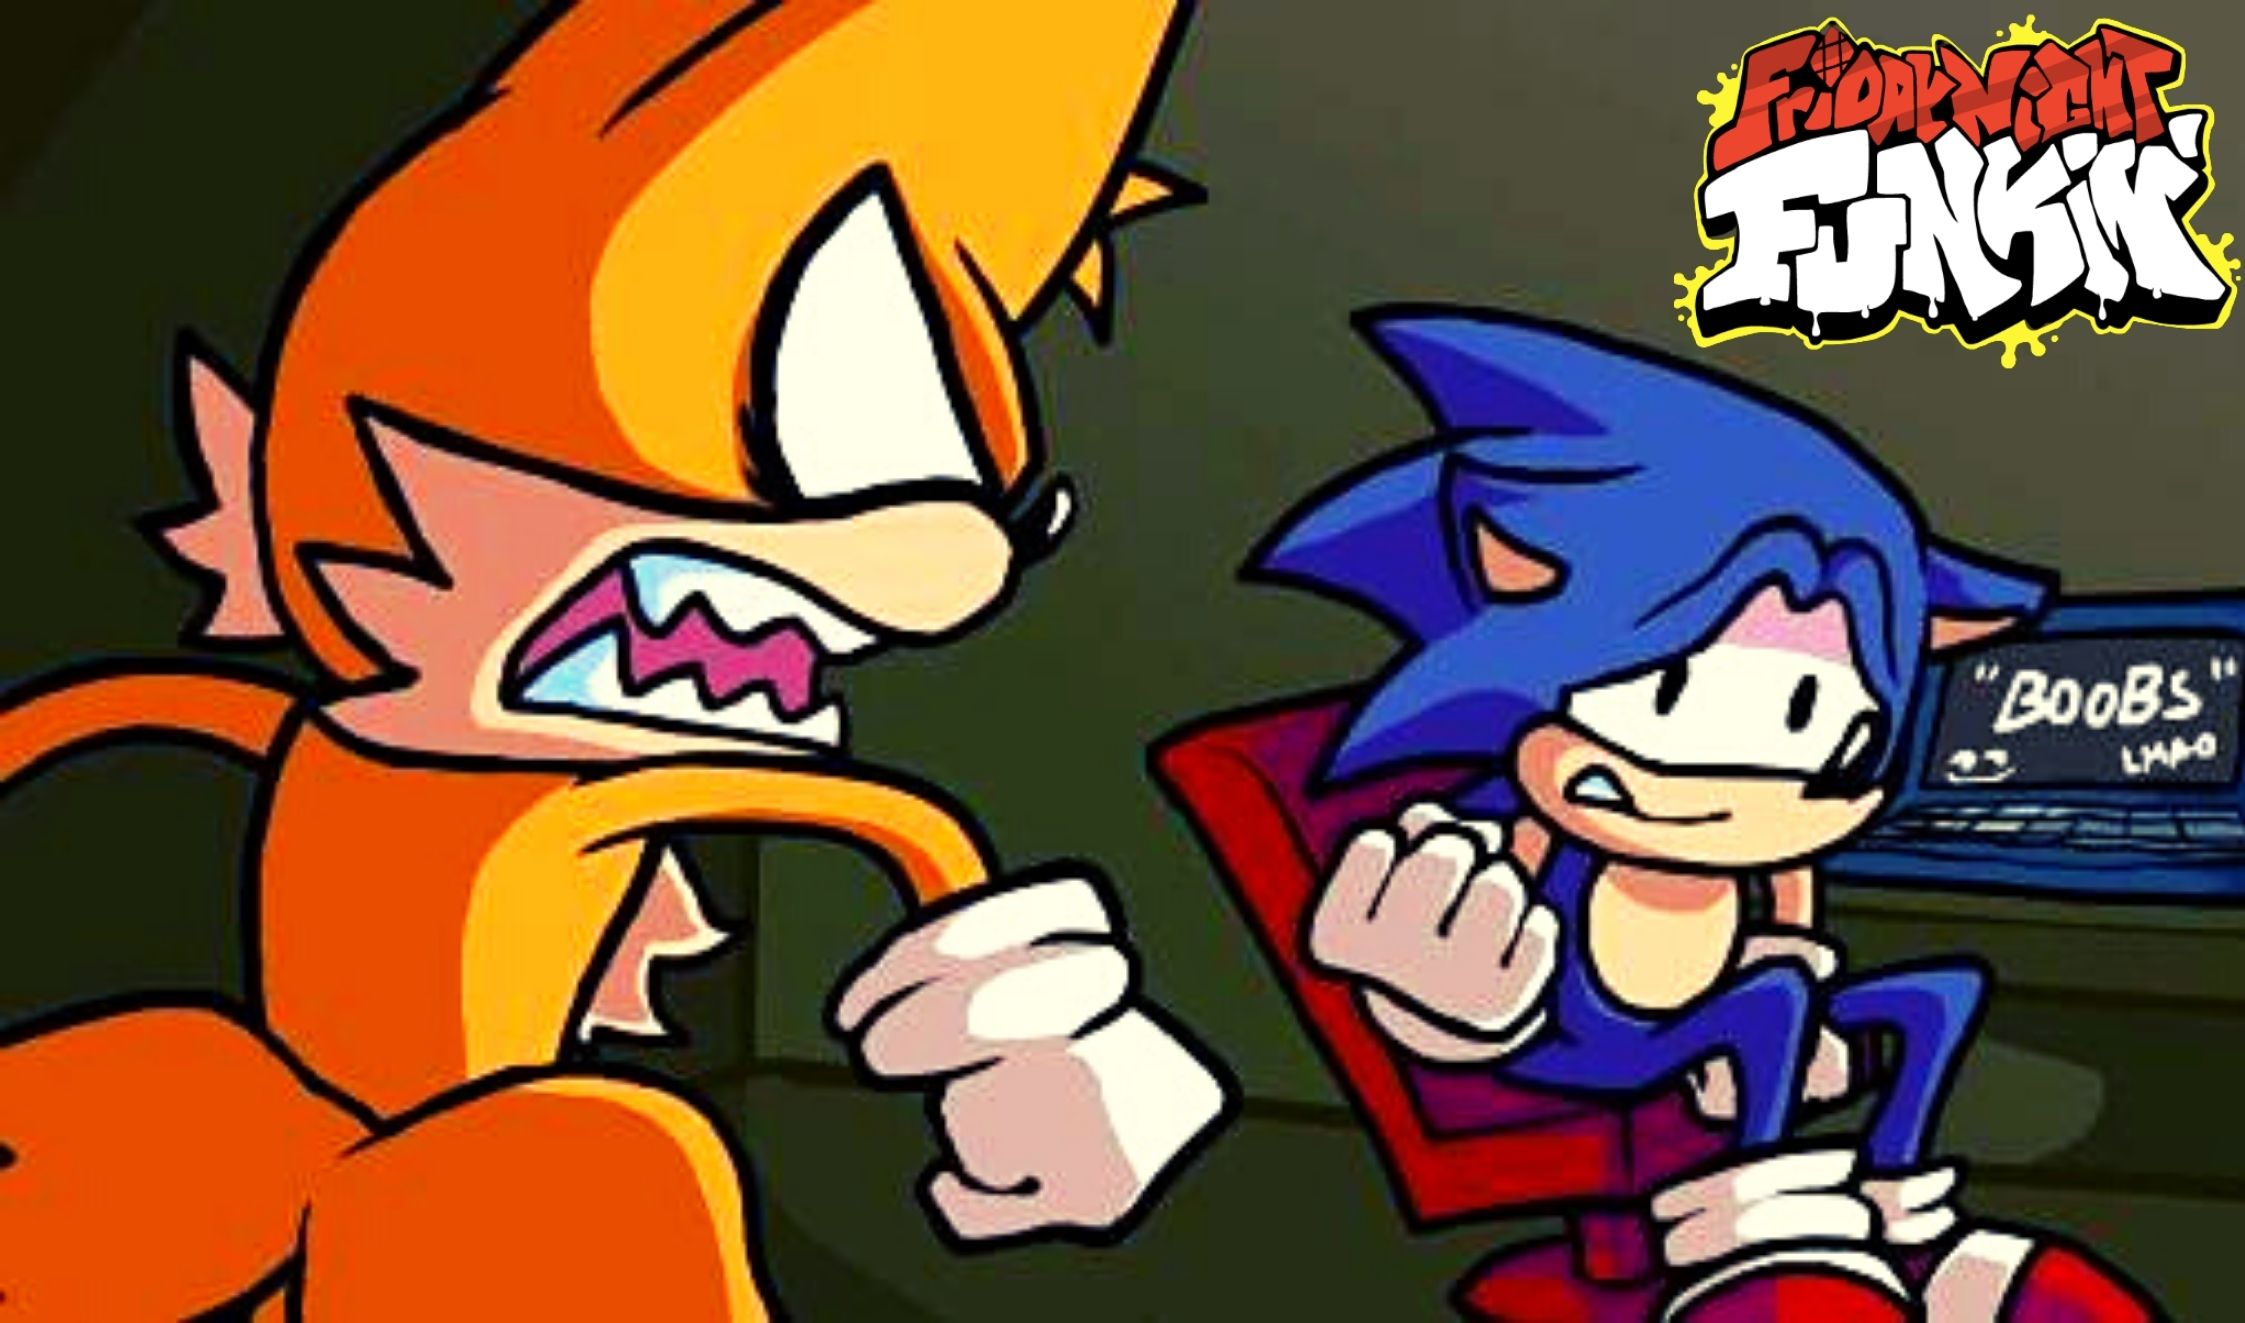 FNF vs Sonic.Exe 2.0 Mod - Play Online Free